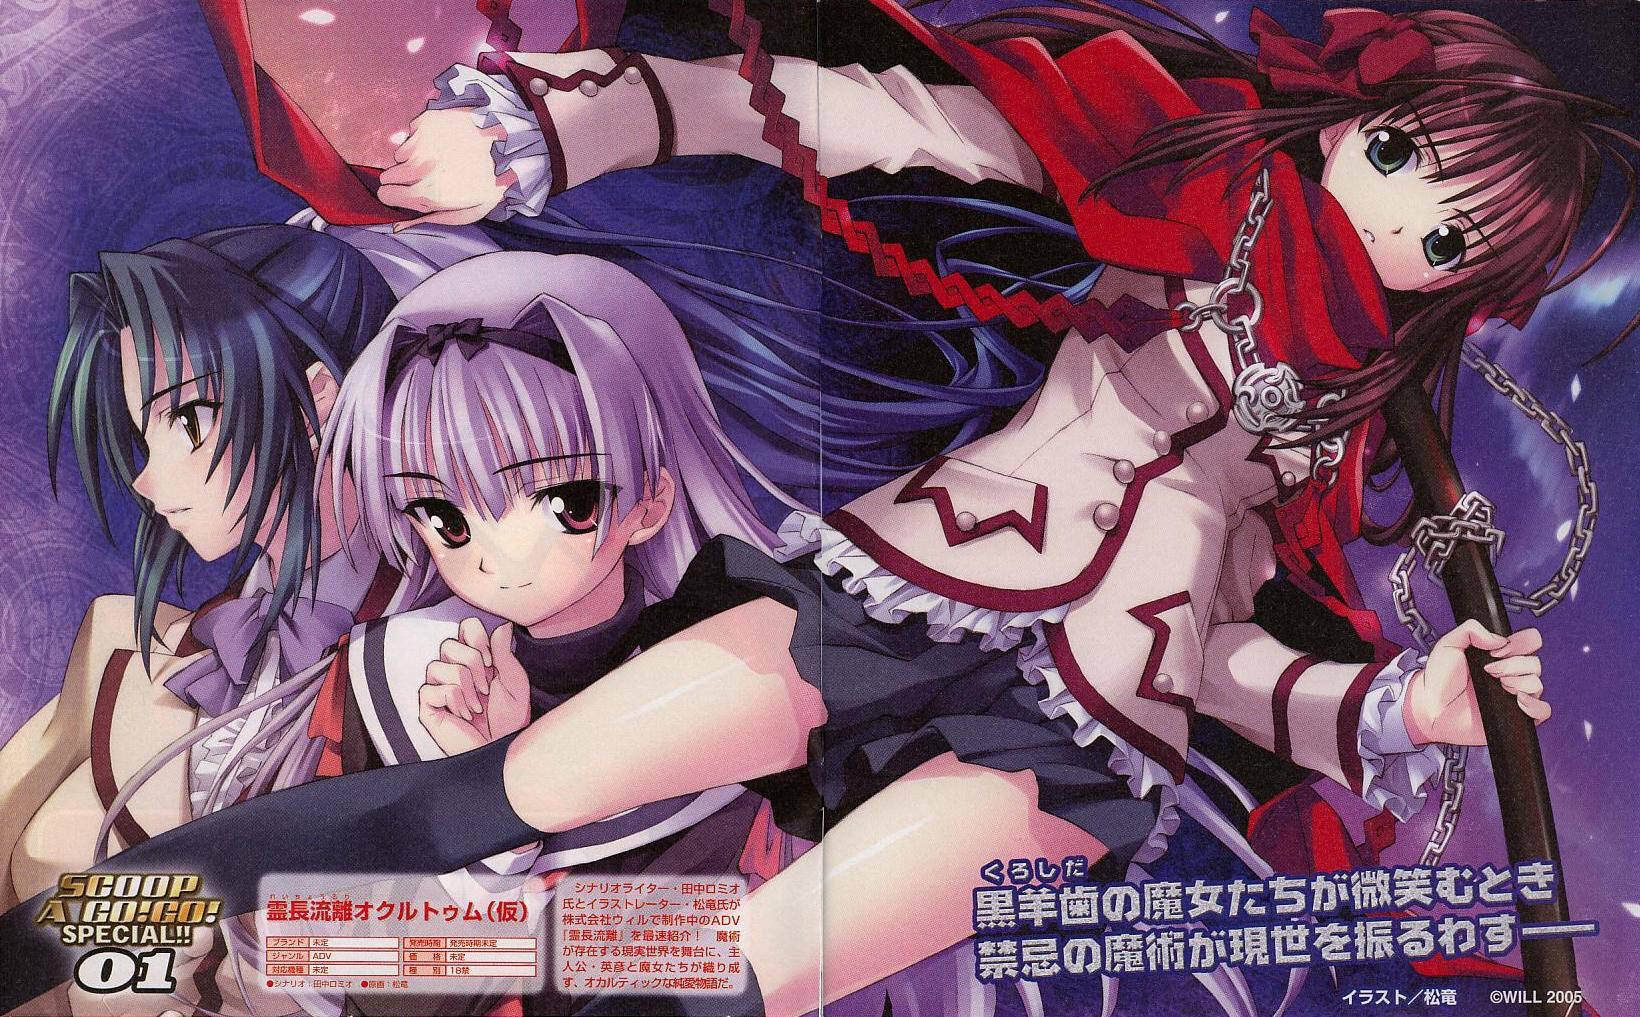 The discontinued eroge looks insanely interesting and Walota wwwwwwww 6